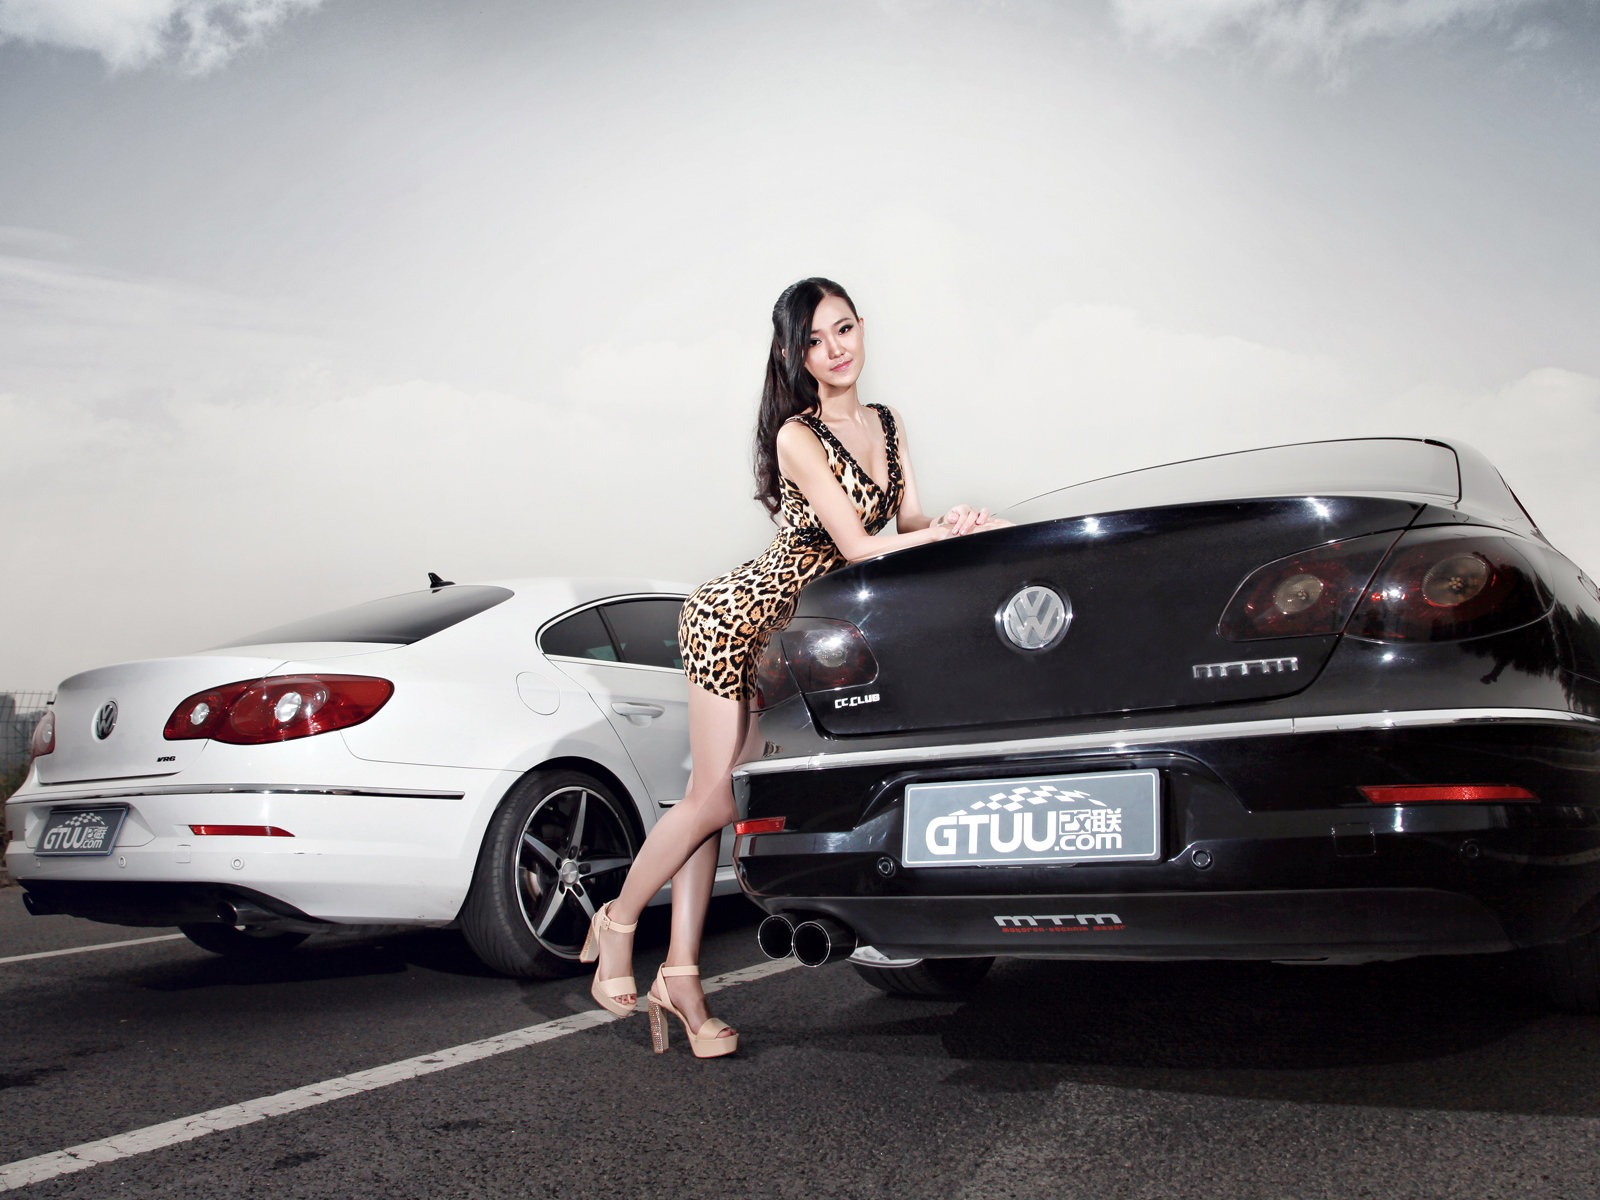 Beautiful leopard dress girl with Volkswagen sports car wallpapers #7 - 1600x1200